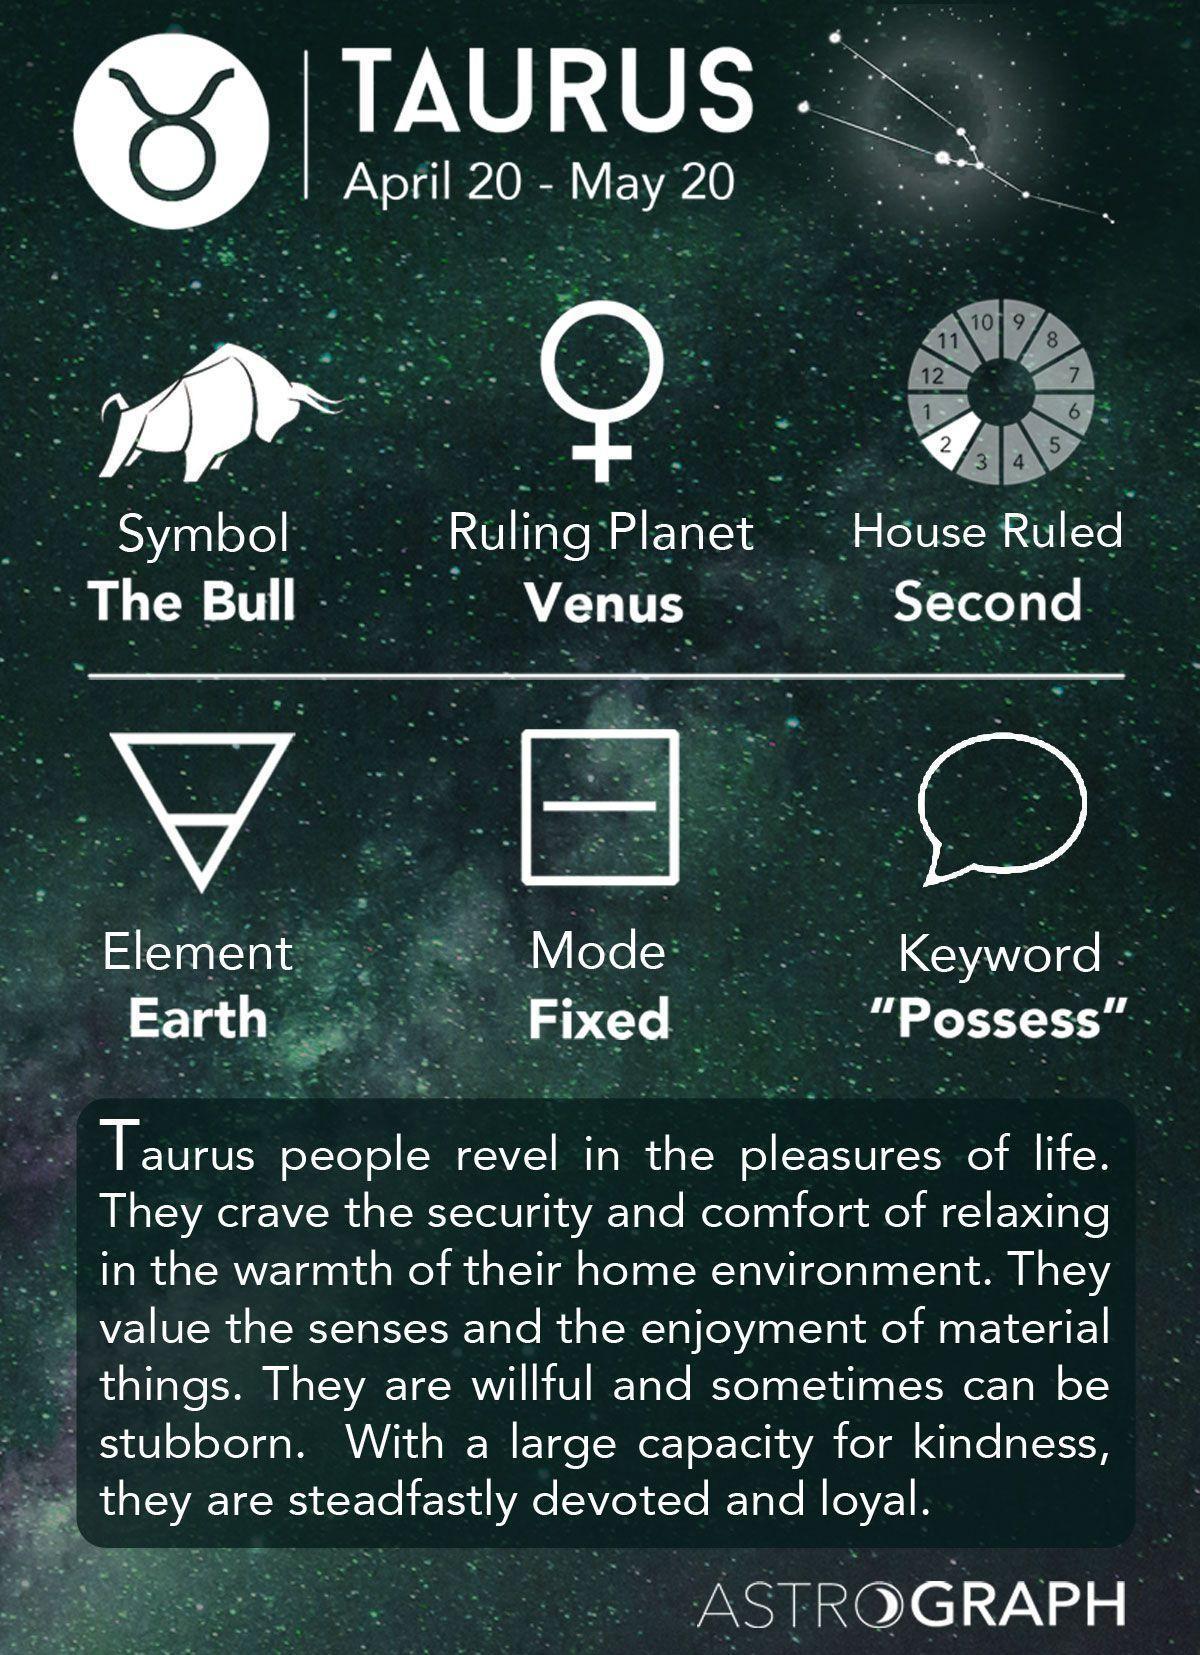 earth signs astrology